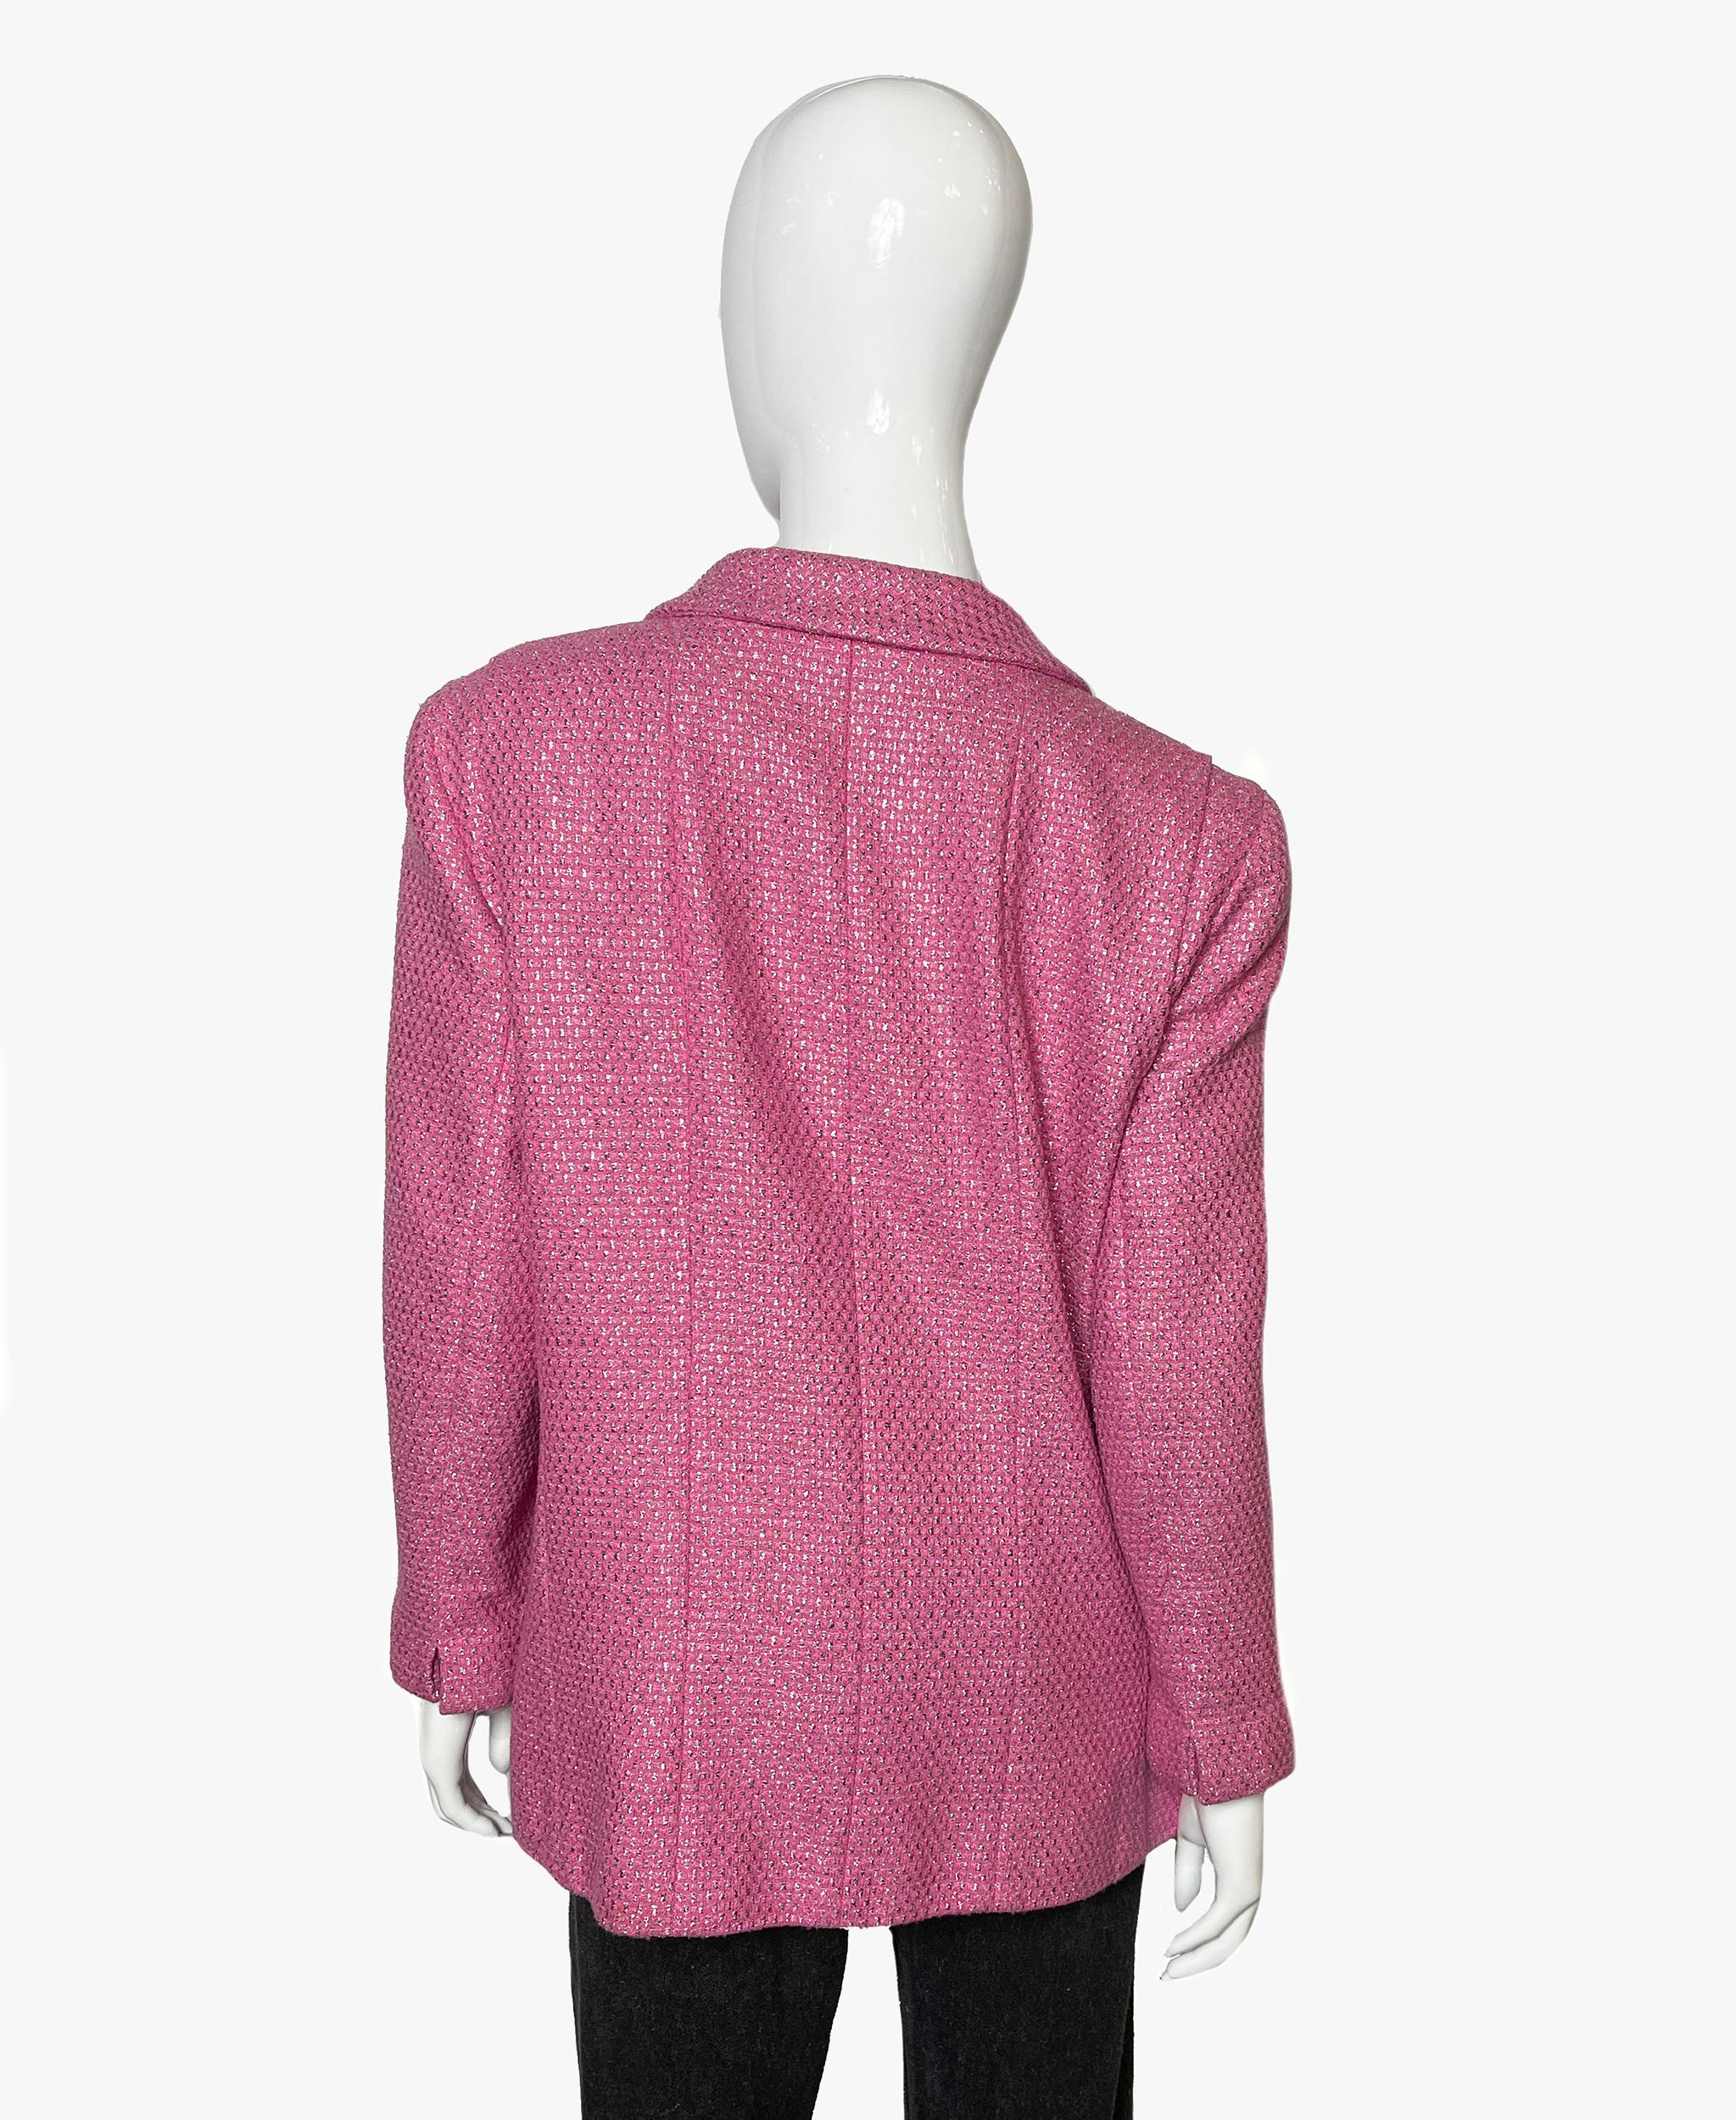 Women's Vintage Chanel Pink and Metallic Blazer, Cruise 2001 Collection